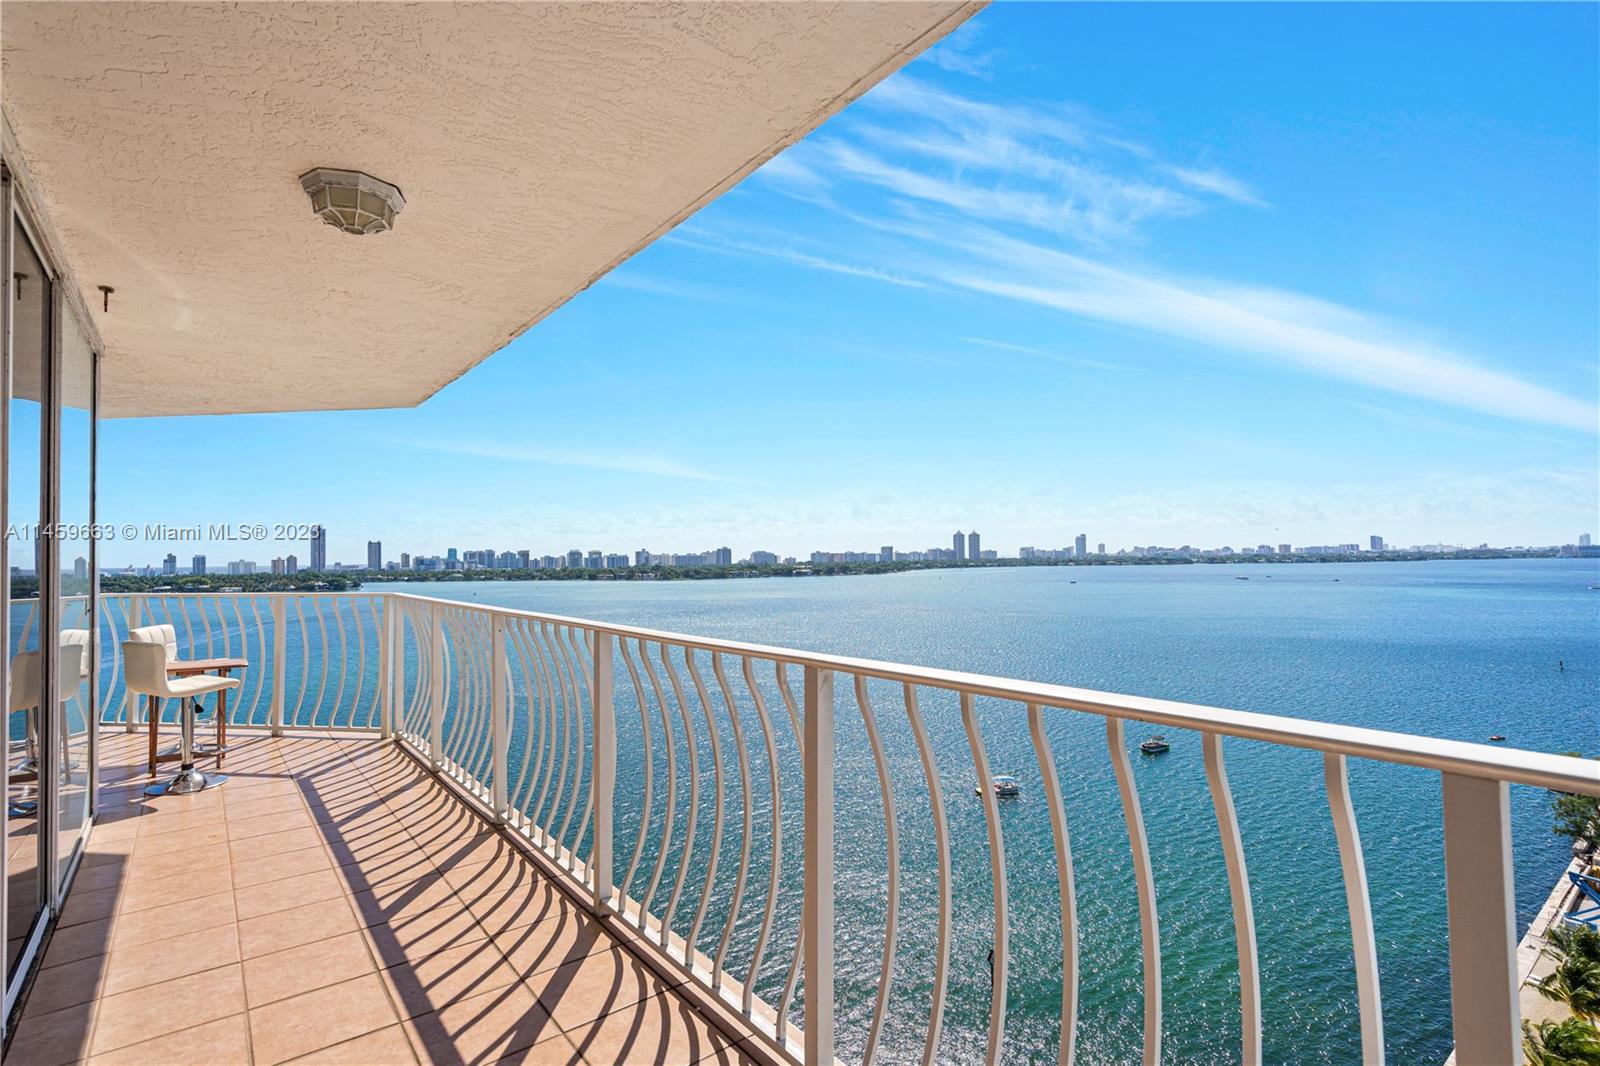 Stunning south-facing bay views across the Miami and Miami Beach skylines for unforgettable sunsets.